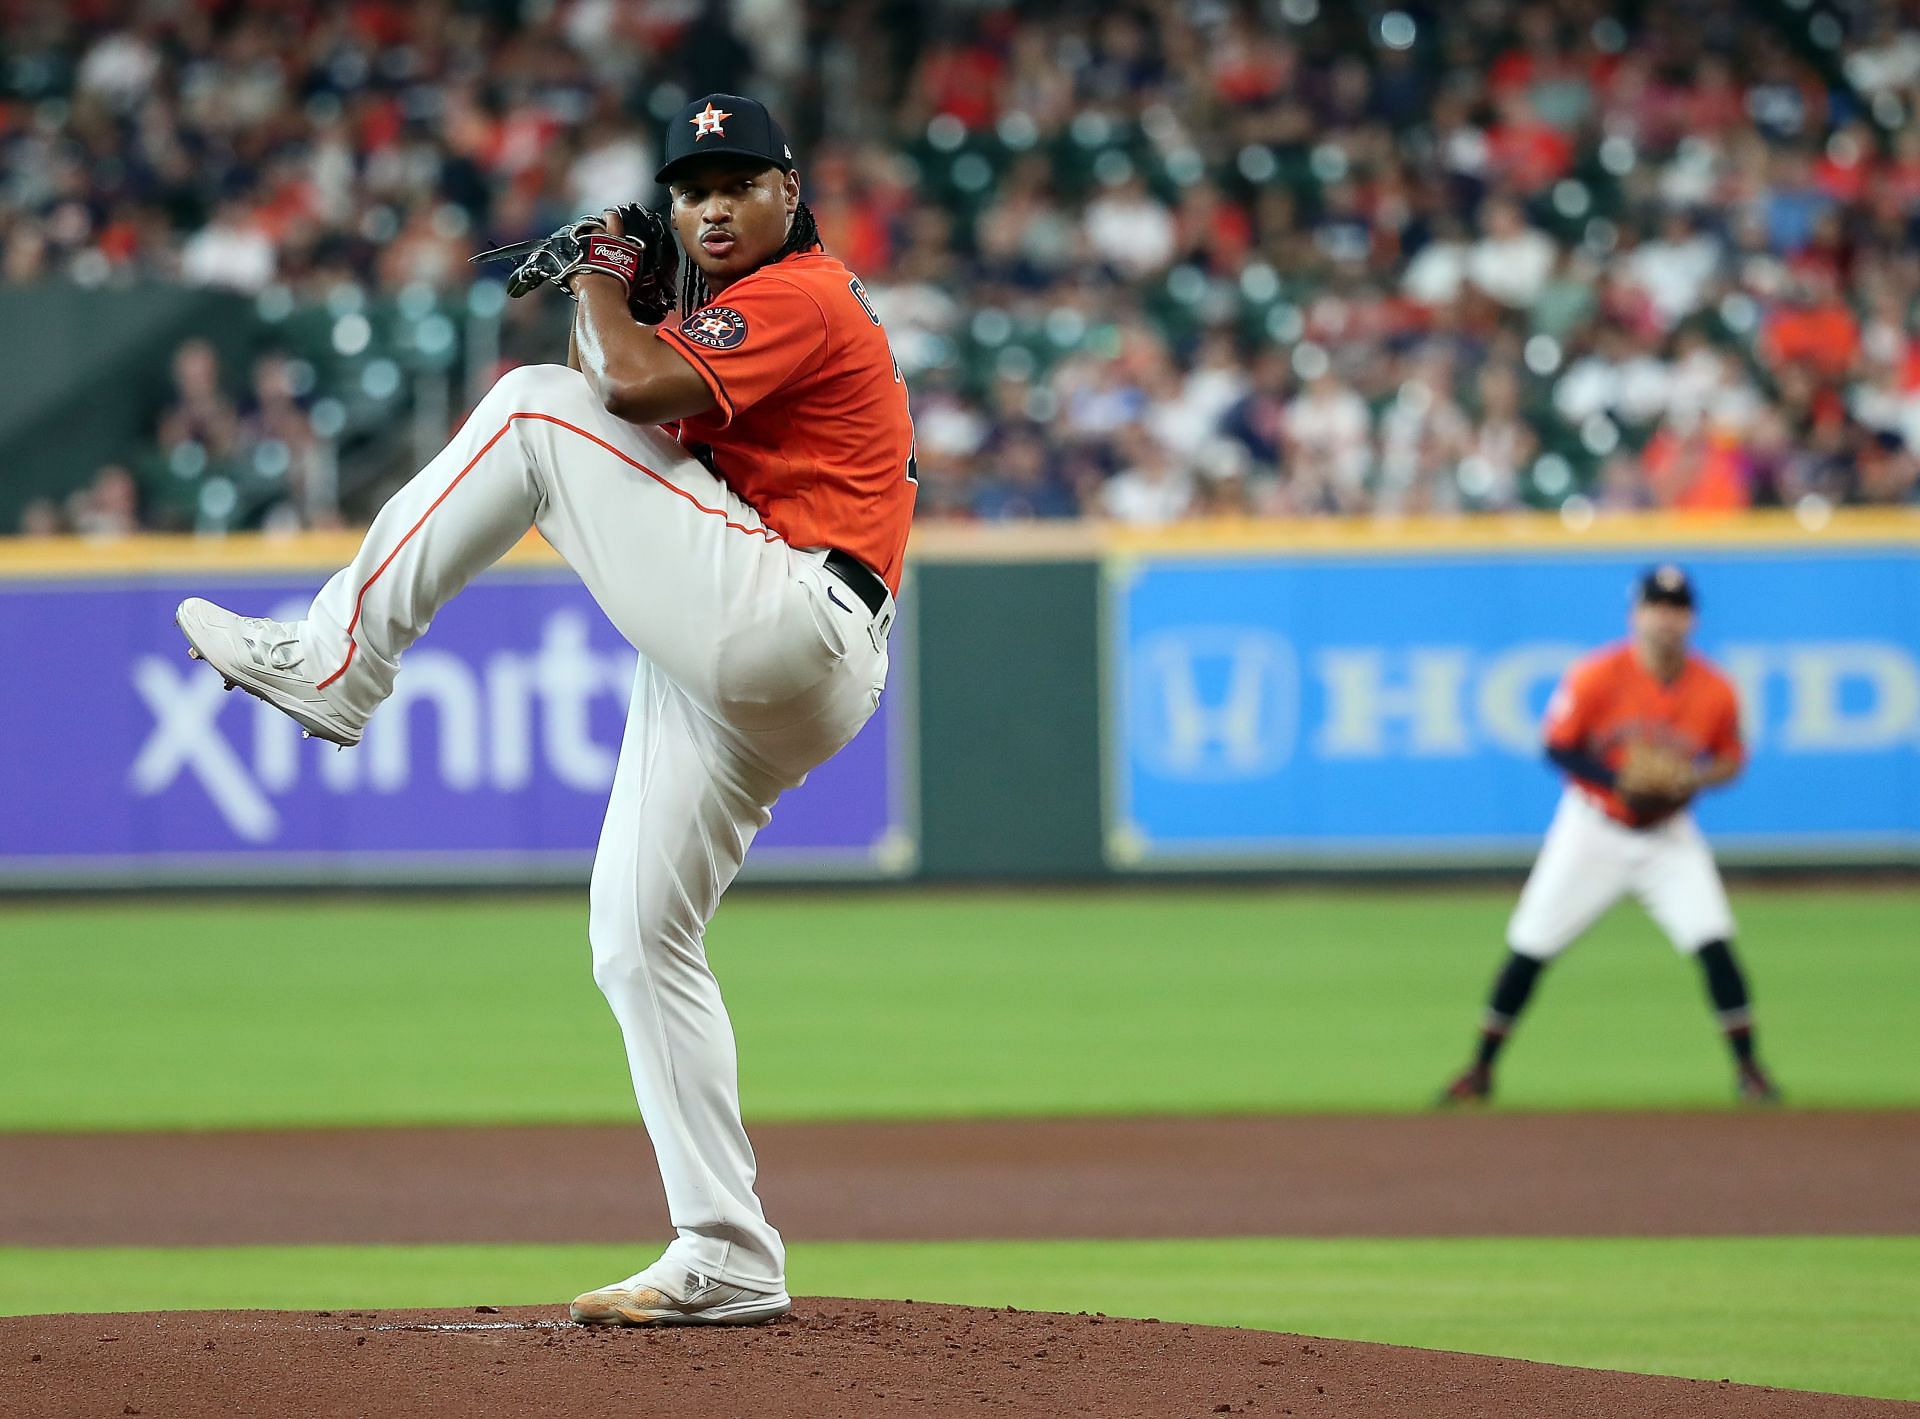 Astros pitchers make history throwing 2 immaculate innings